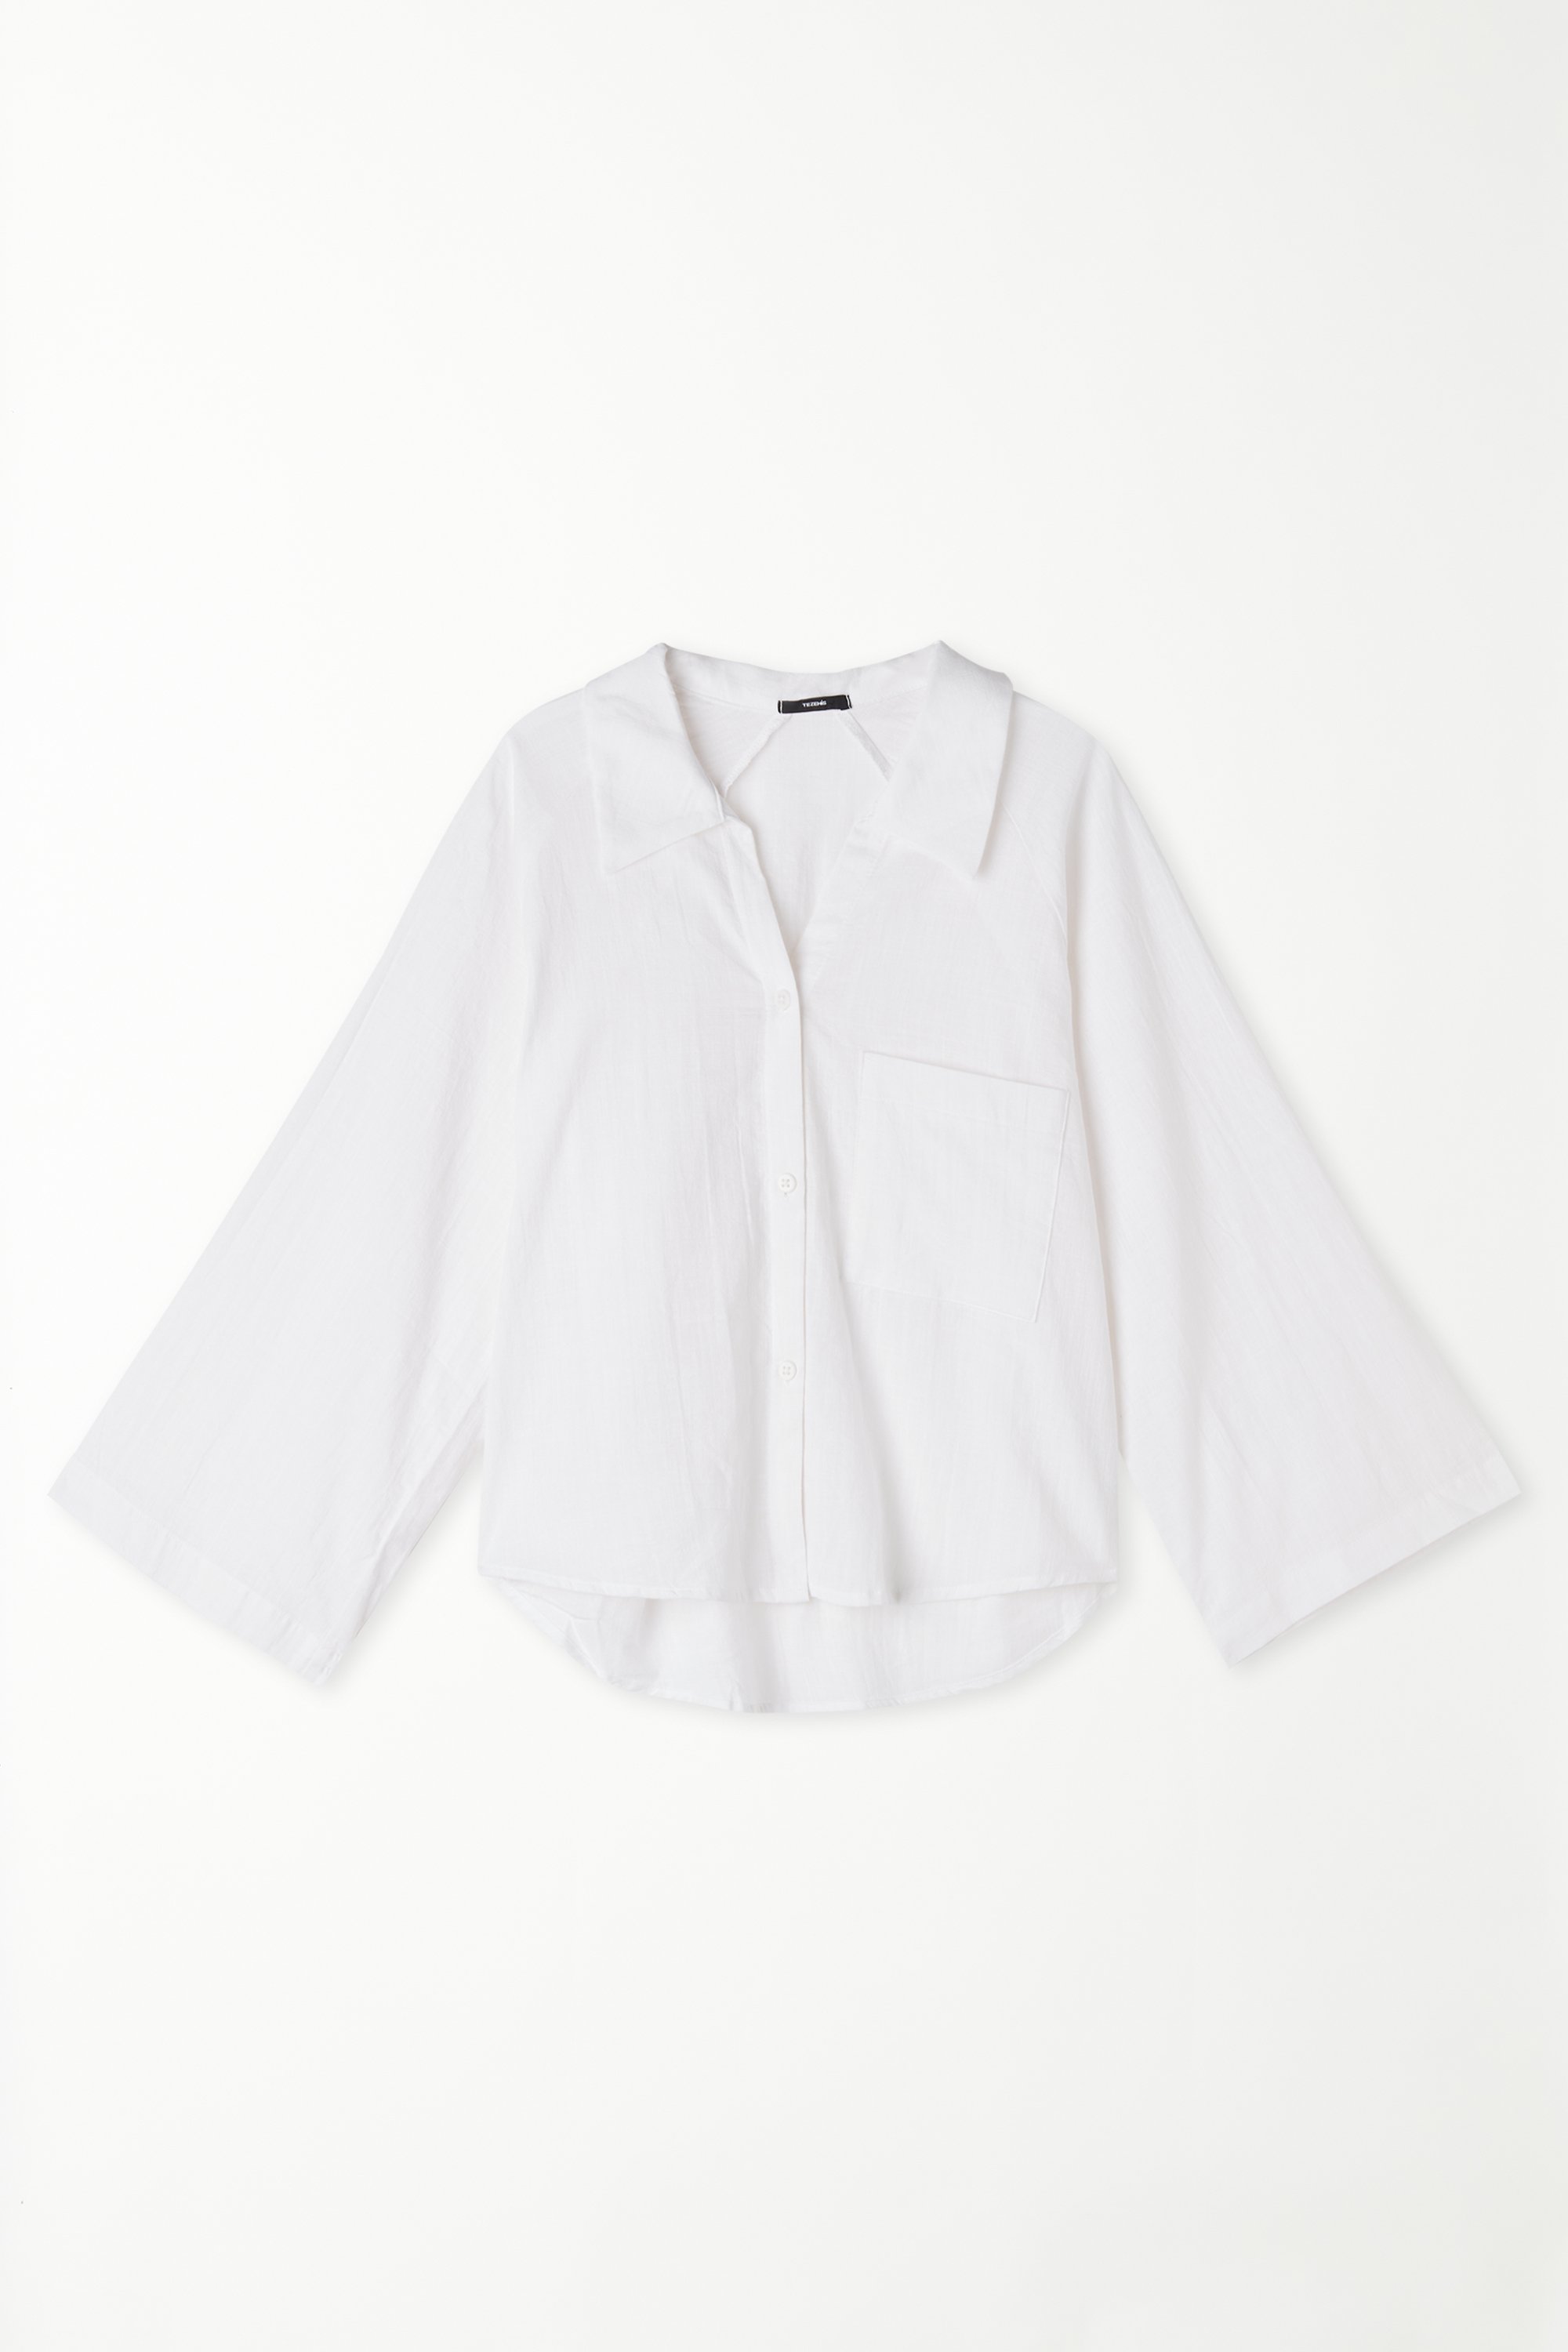 Loose 3/4 Sleeve Cropped Shirt in 100% Super Light Cotton